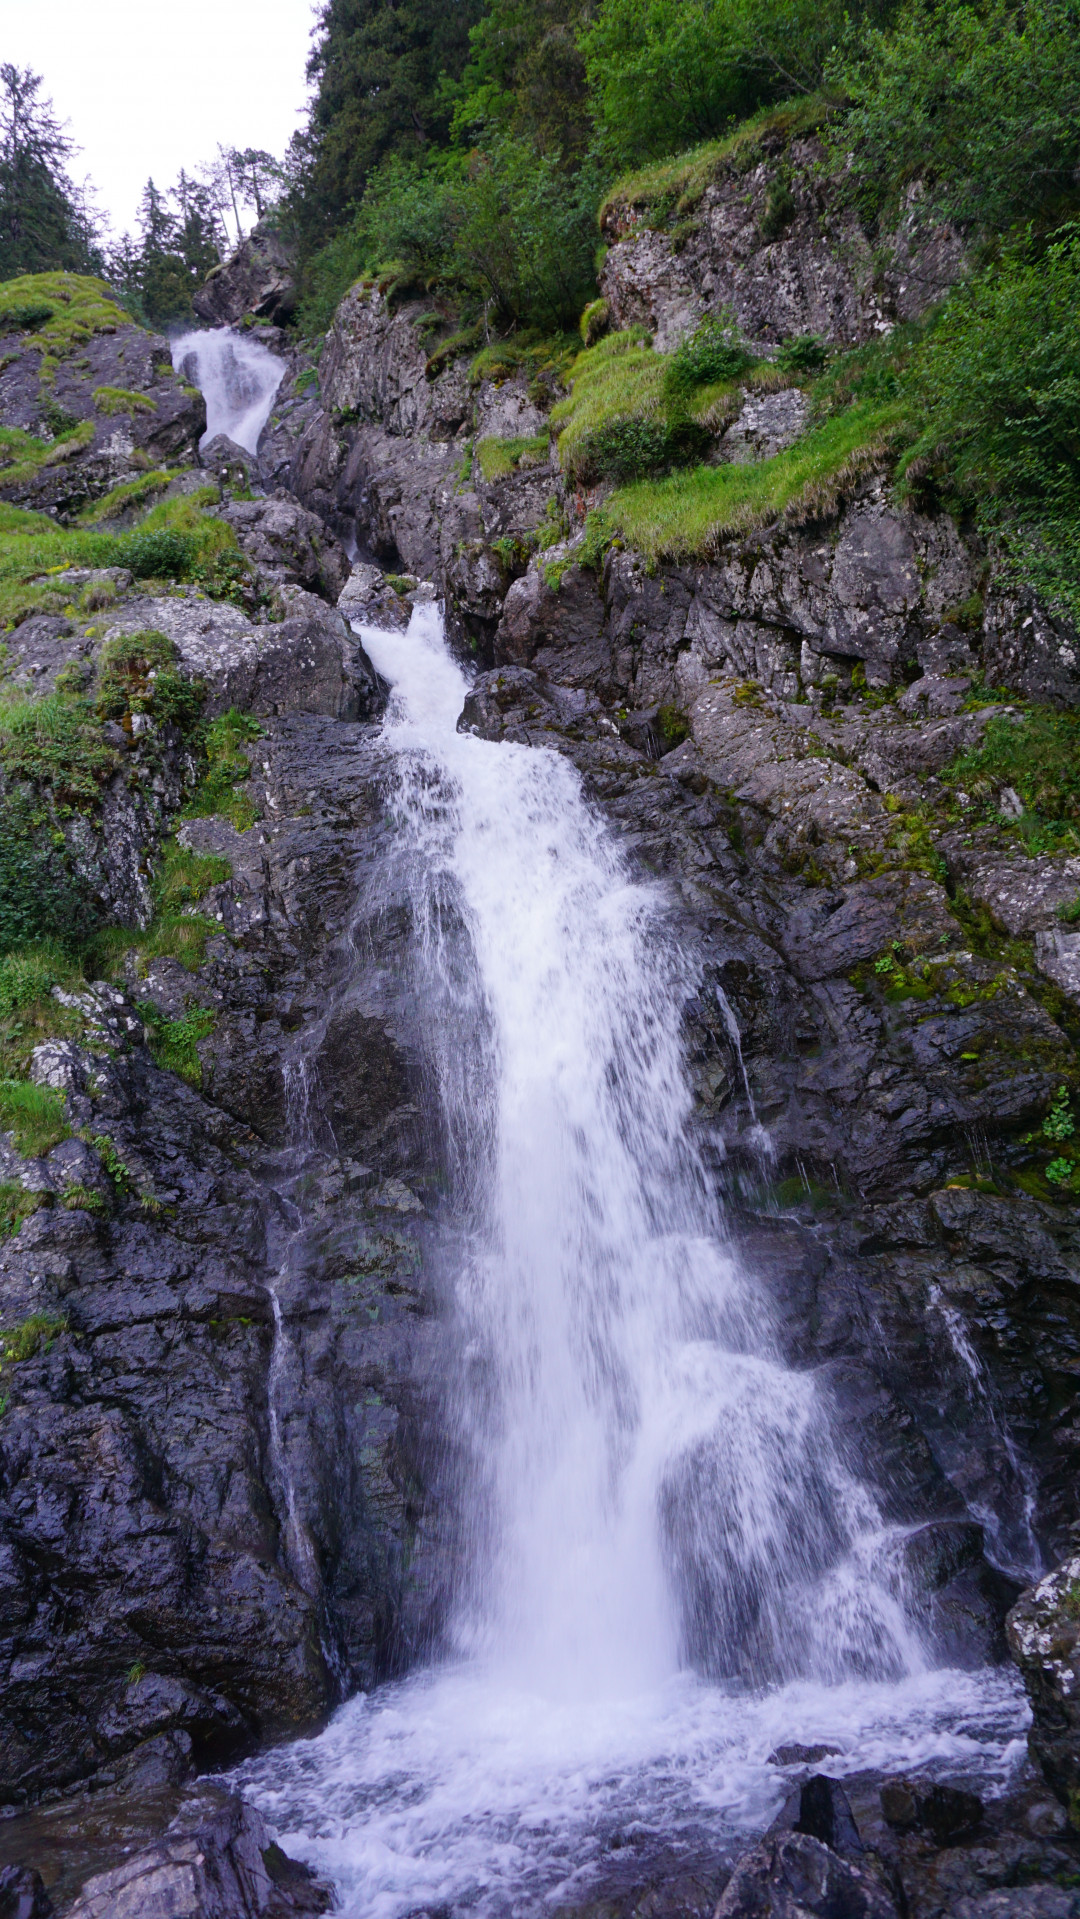 Oursière waterfall